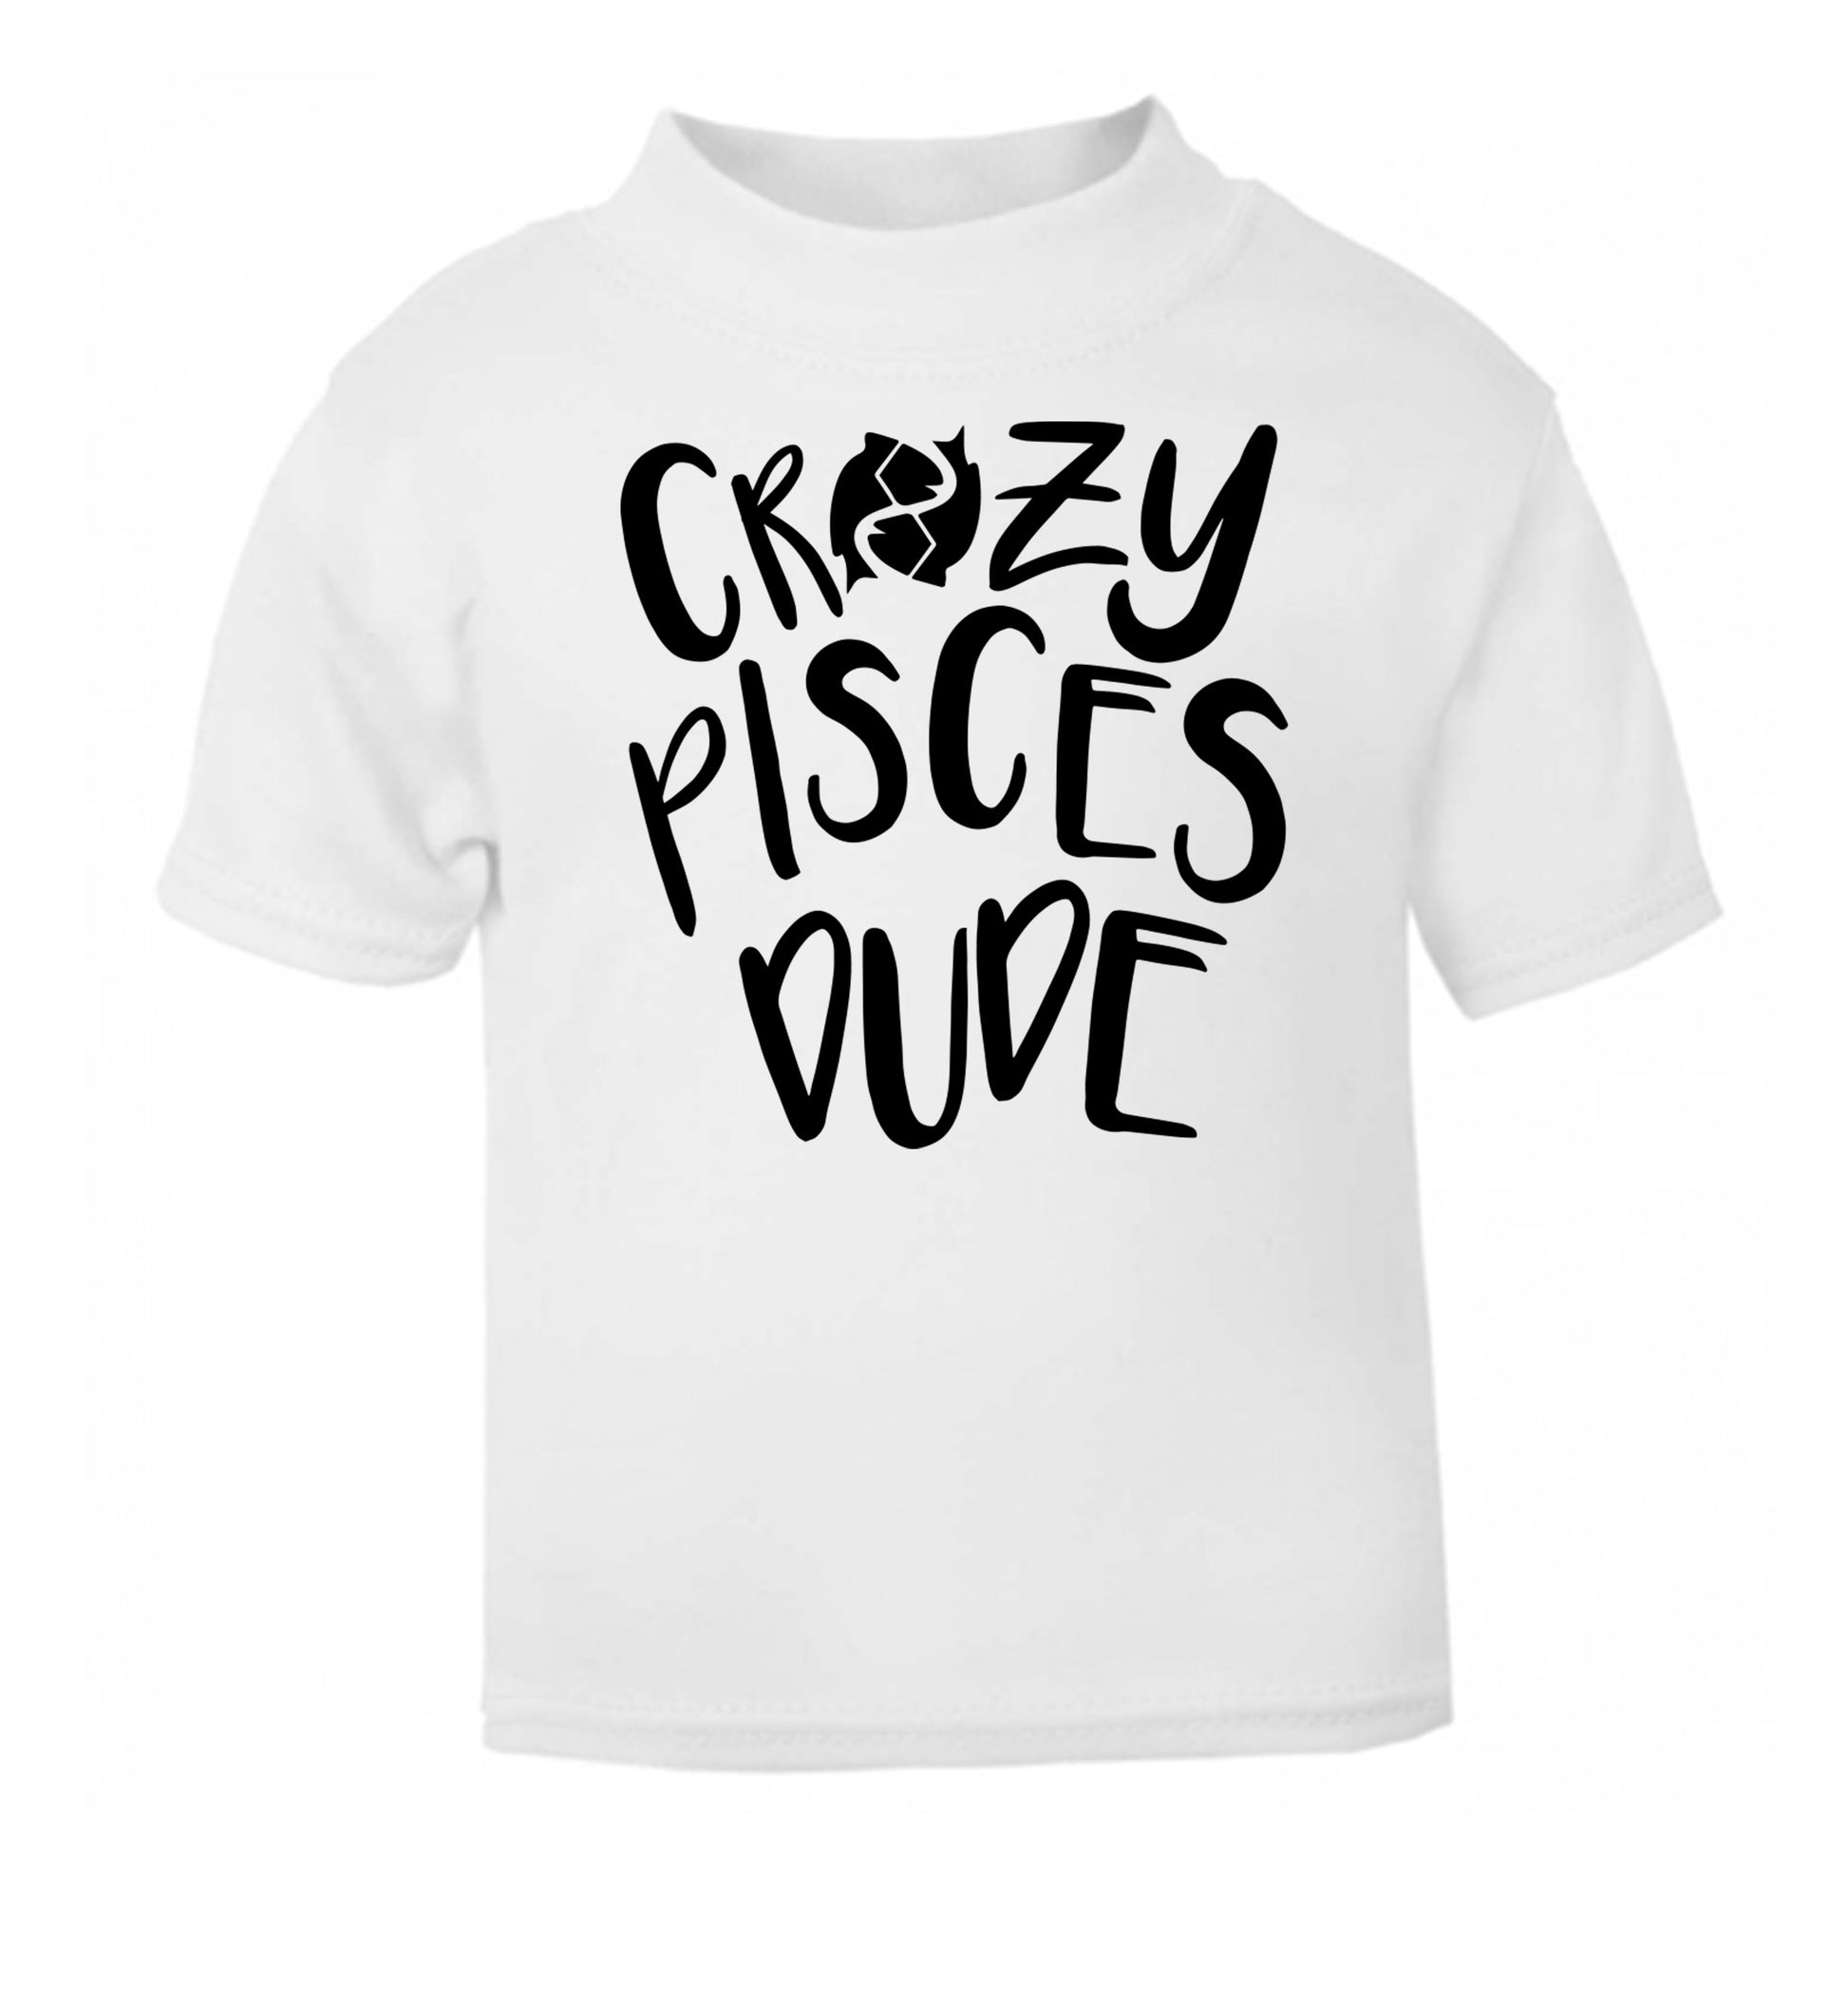 Crazy pisces dude white Baby Toddler Tshirt 2 Years